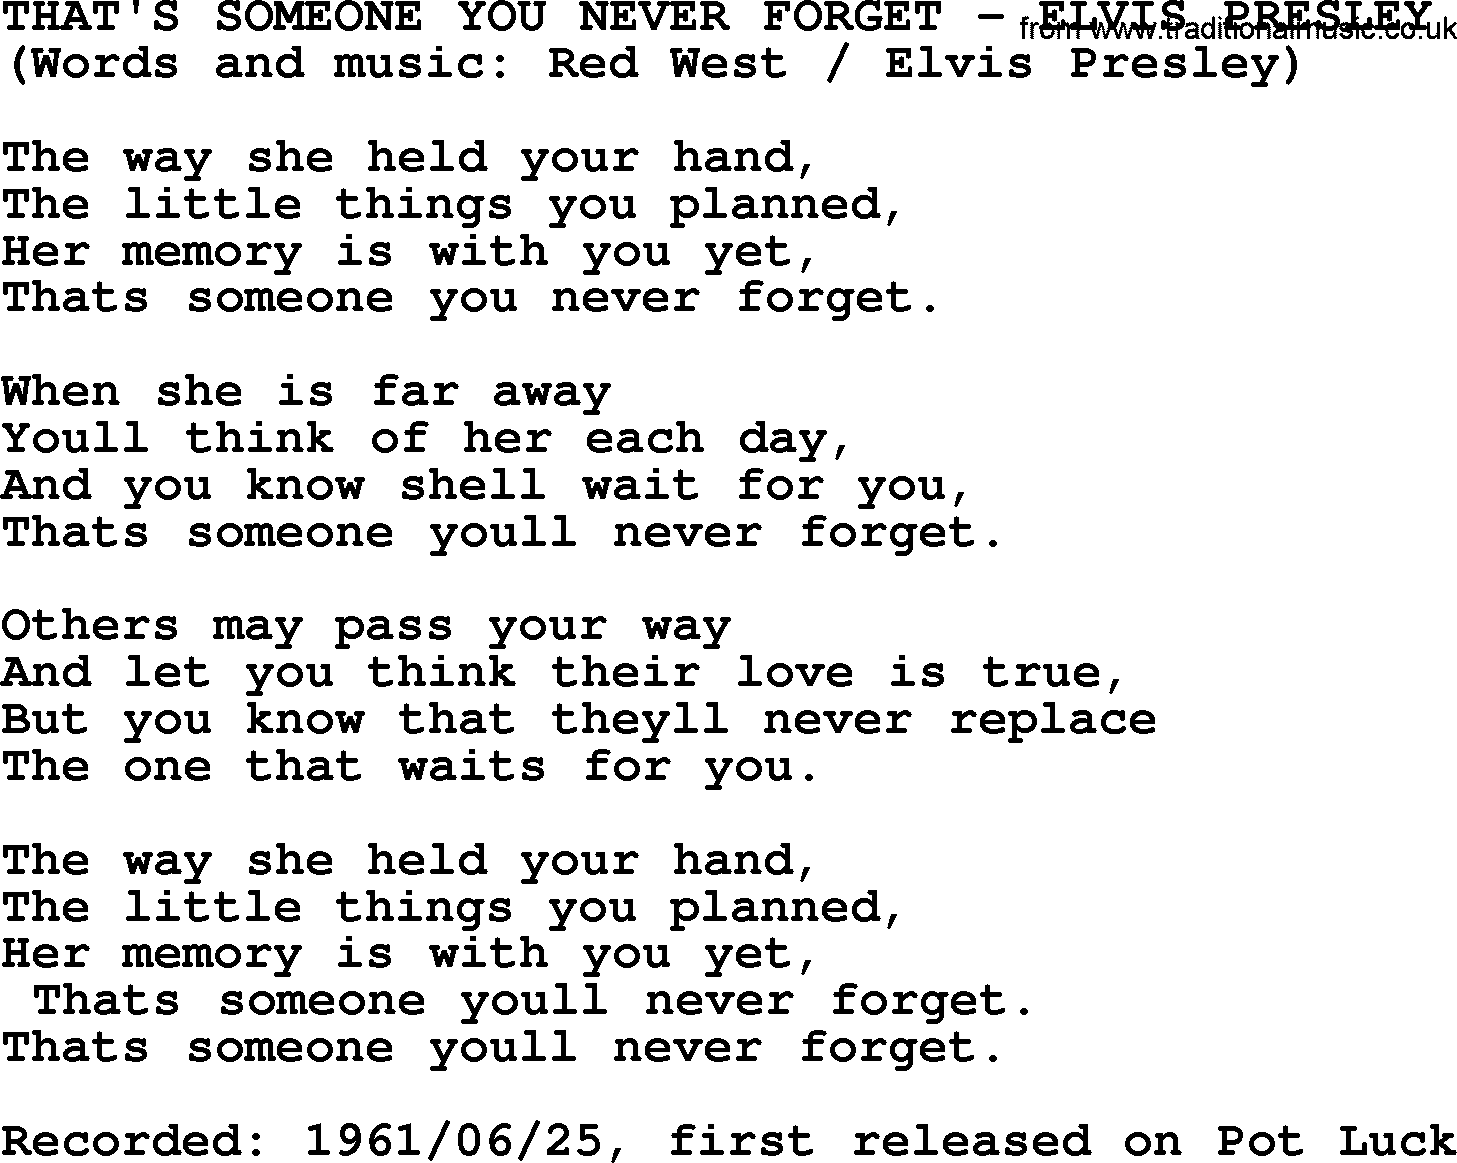 Elvis Presley song: That's Someone You Never Forget lyrics